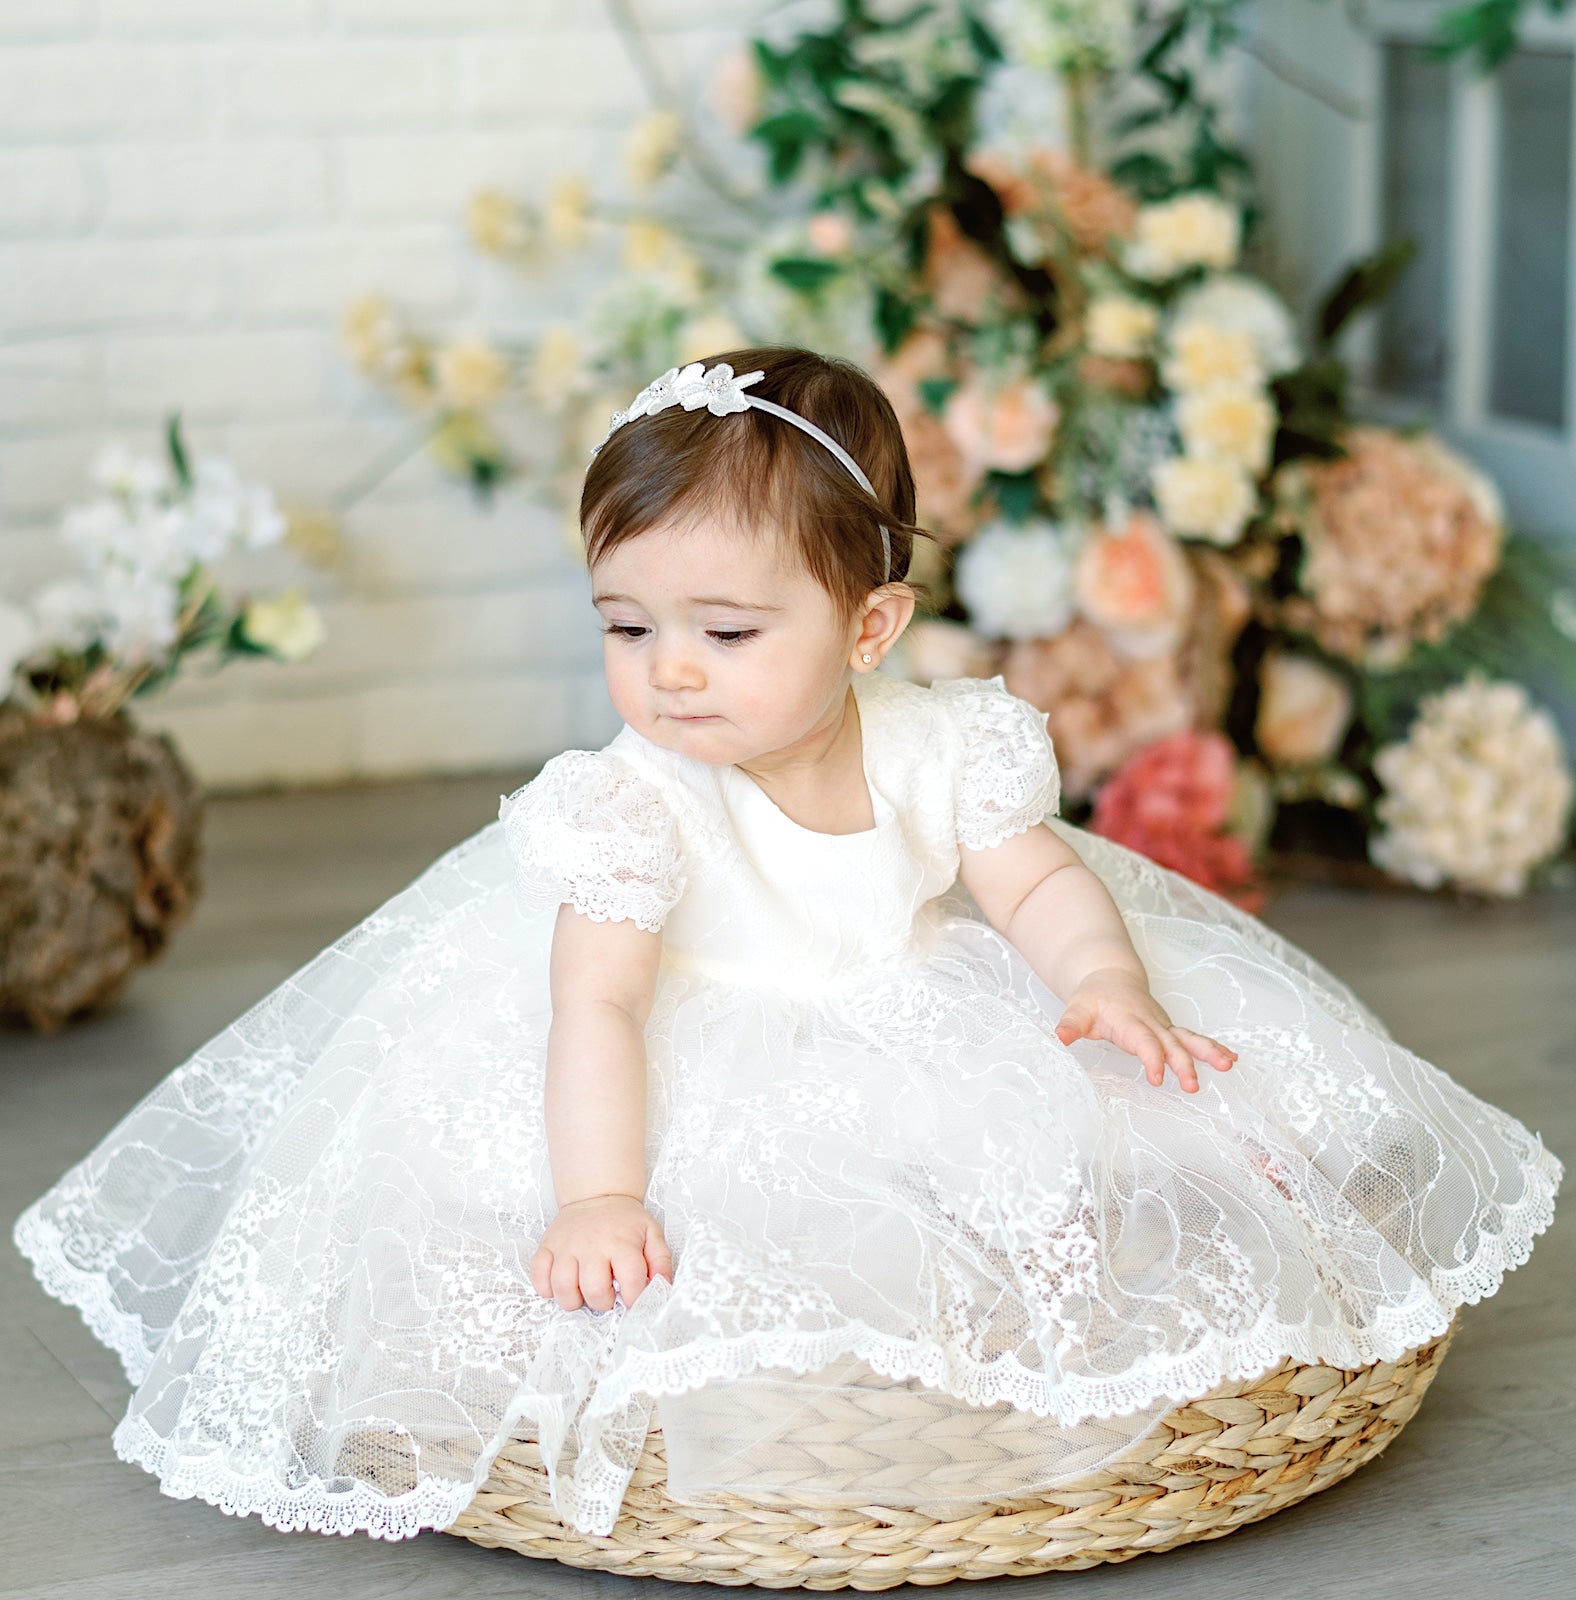 Scalloped All Over Lace Flower Baptism Dress